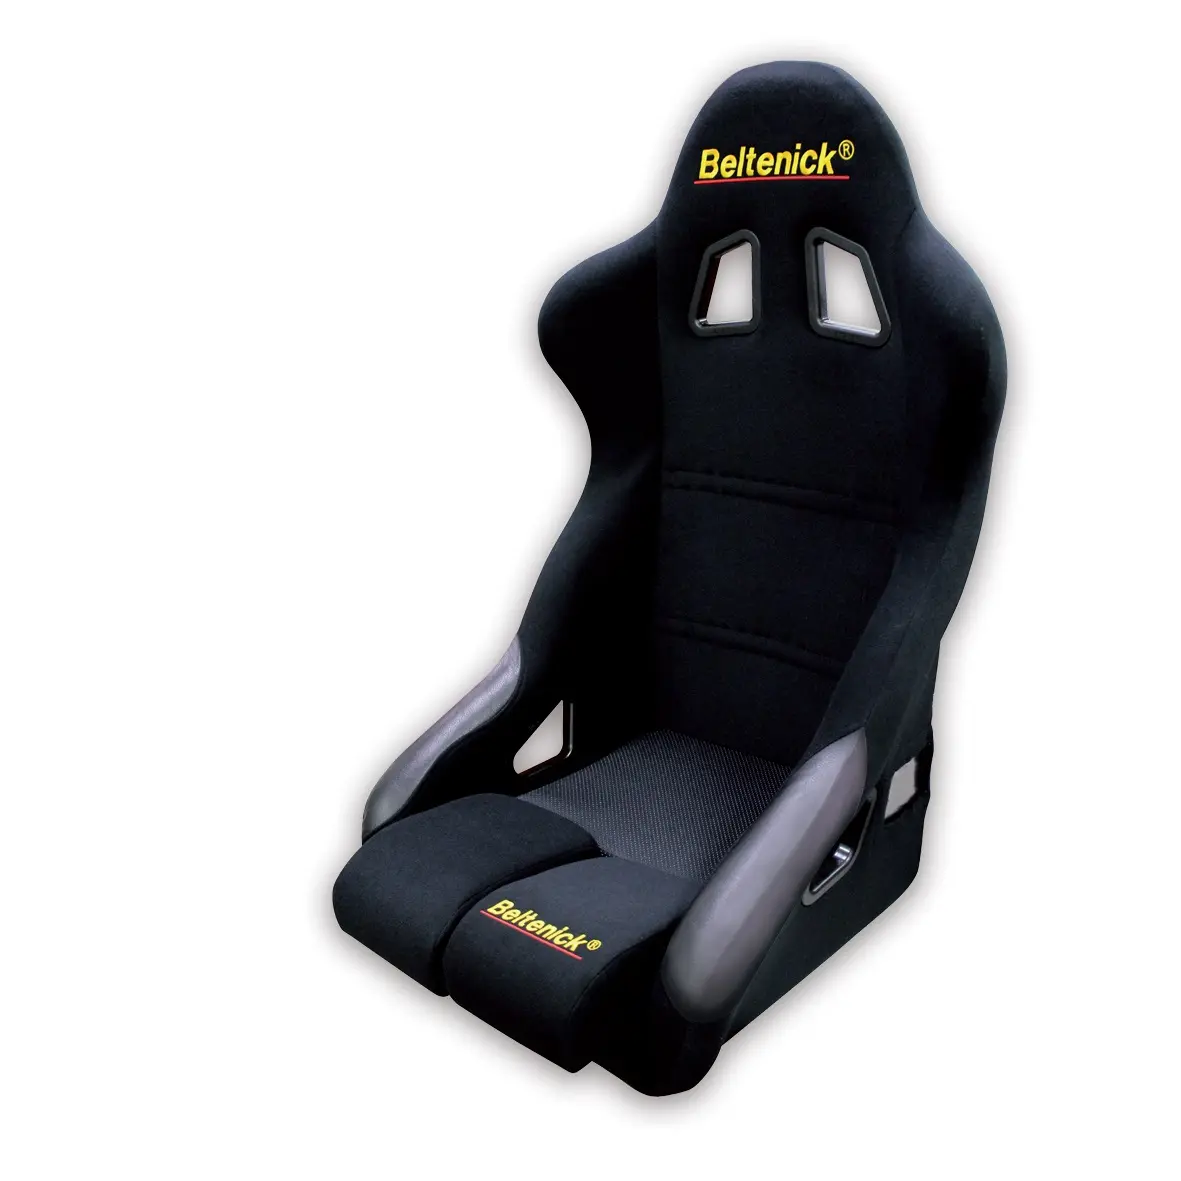 Beltenick FIA Approved Racing Car Steel Seat For Auto Car Racing Sports